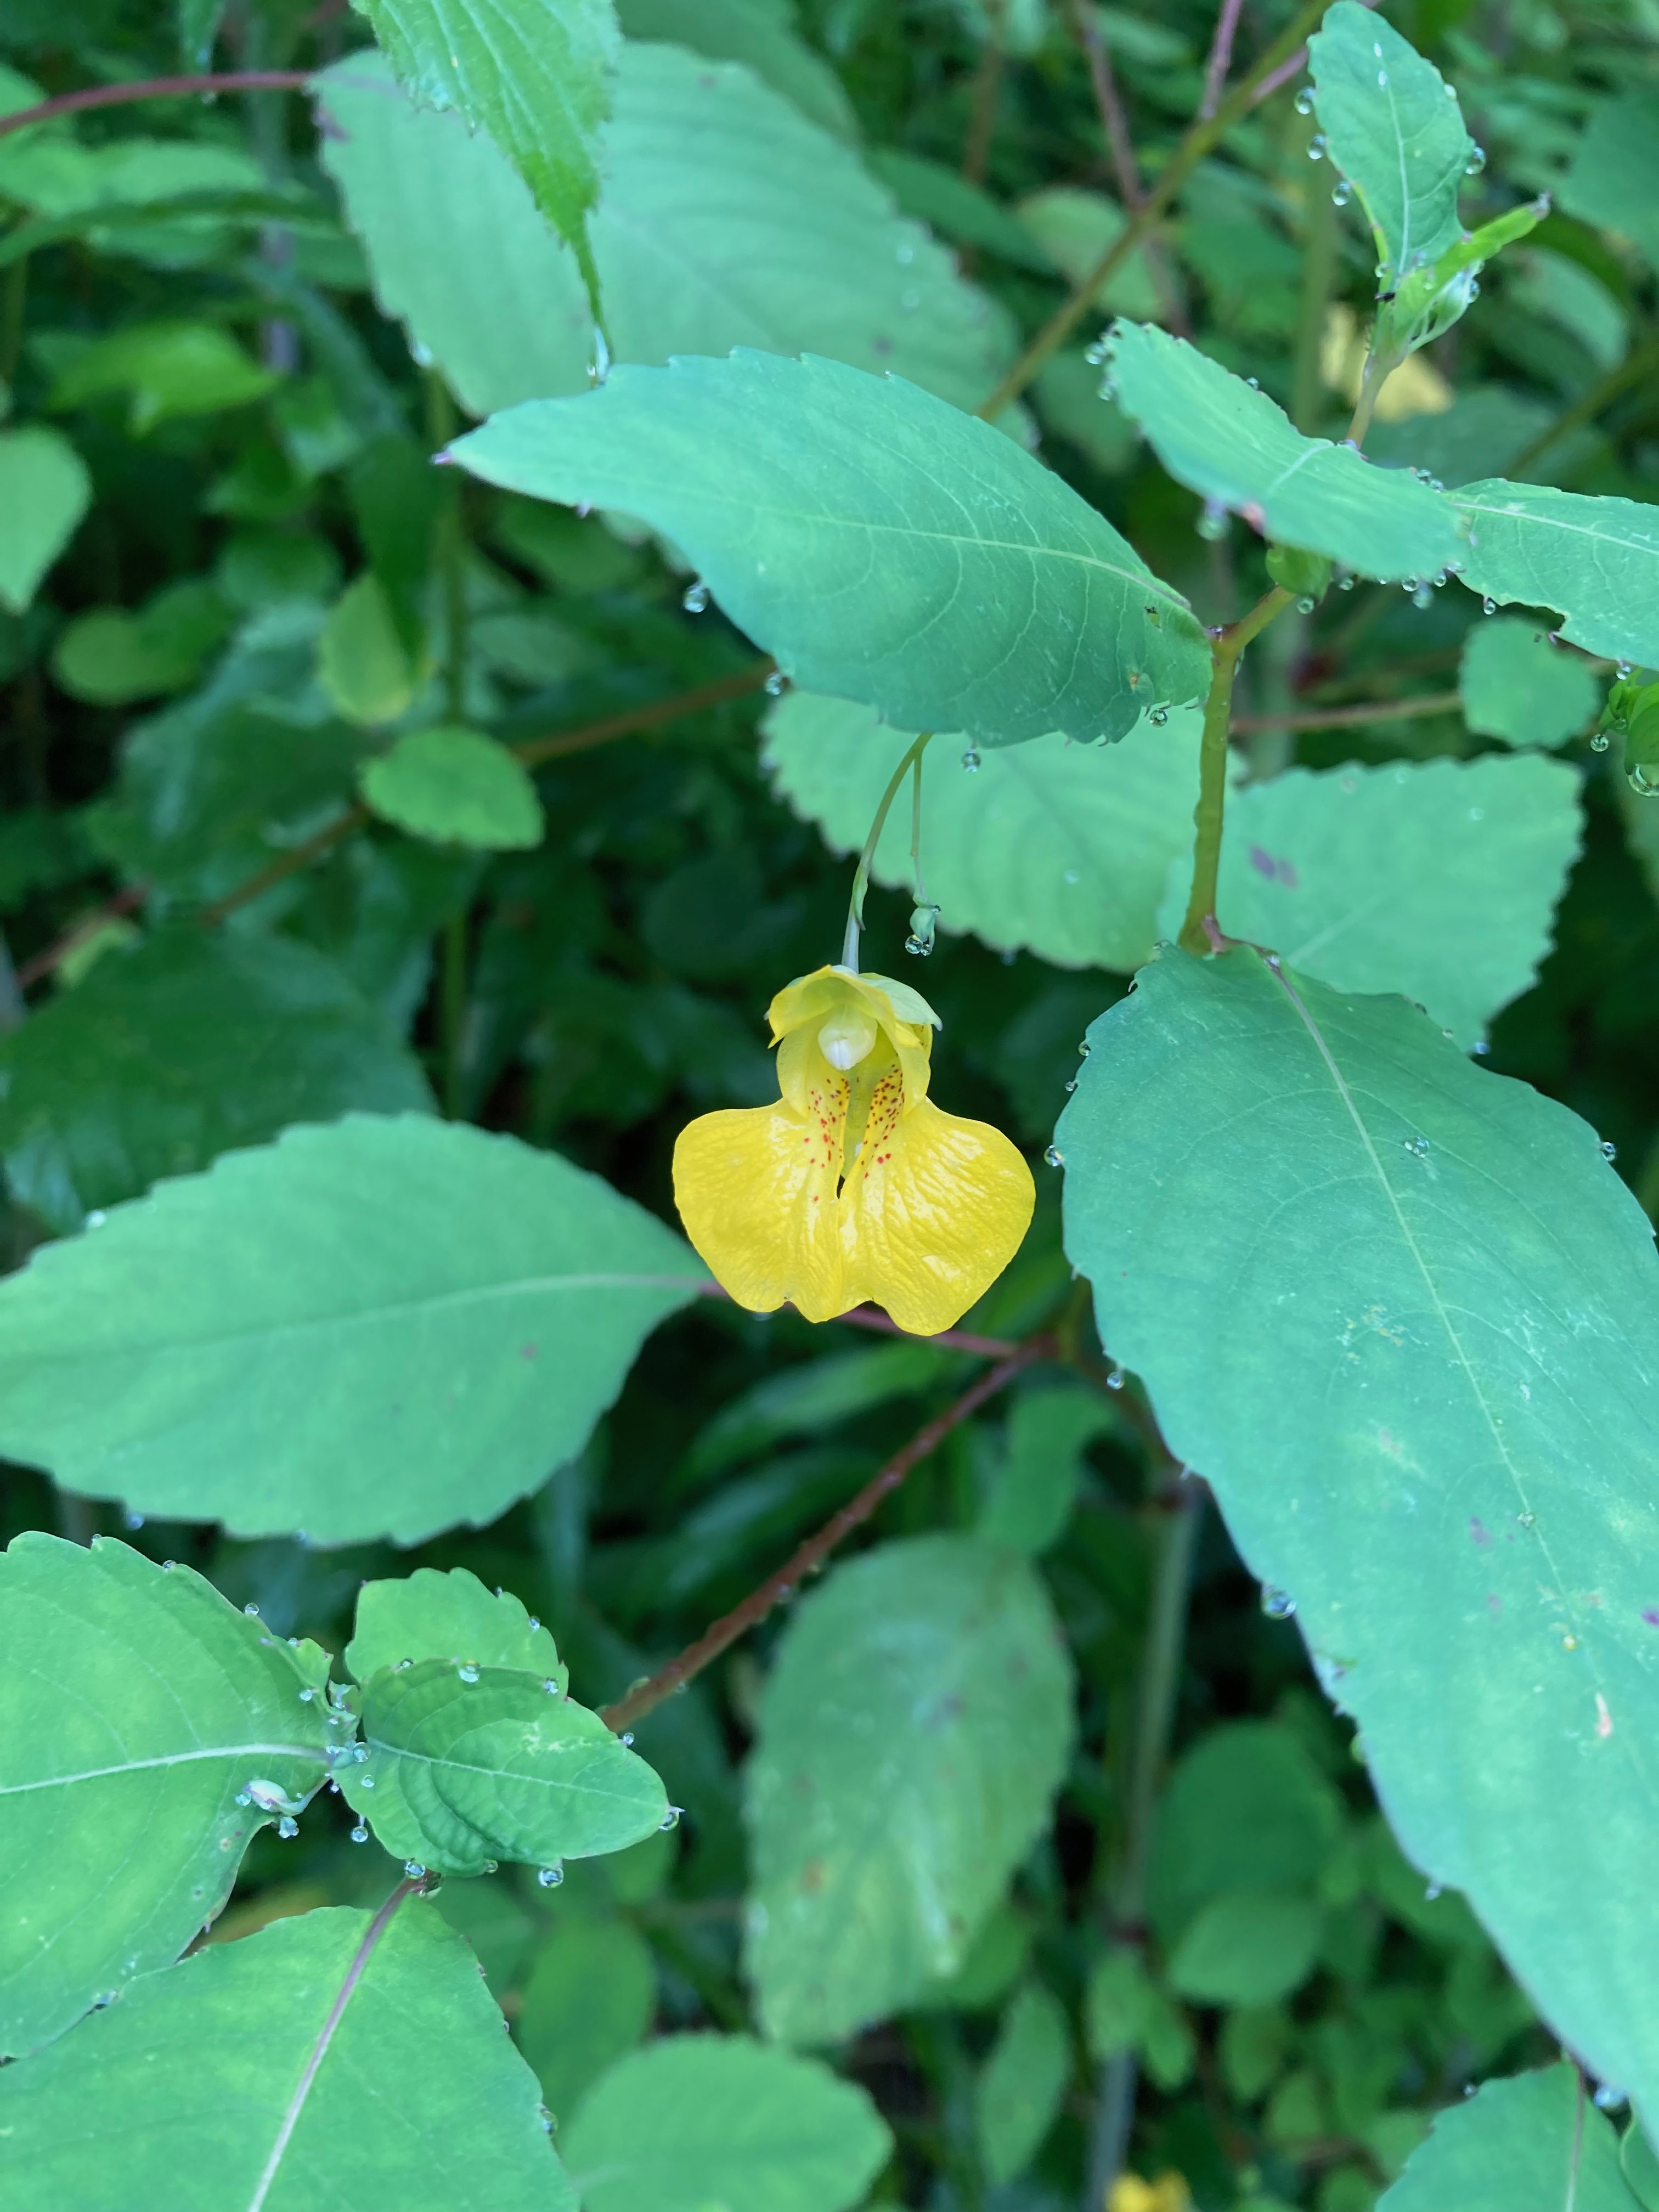 The Scientific Name is Impatiens pallida. You will likely hear them called Yellow Jewelweed, Yellow Touch-me-not, Pale Touch-me-not. This picture shows the The alternate leaves have crenate margins. of Impatiens pallida